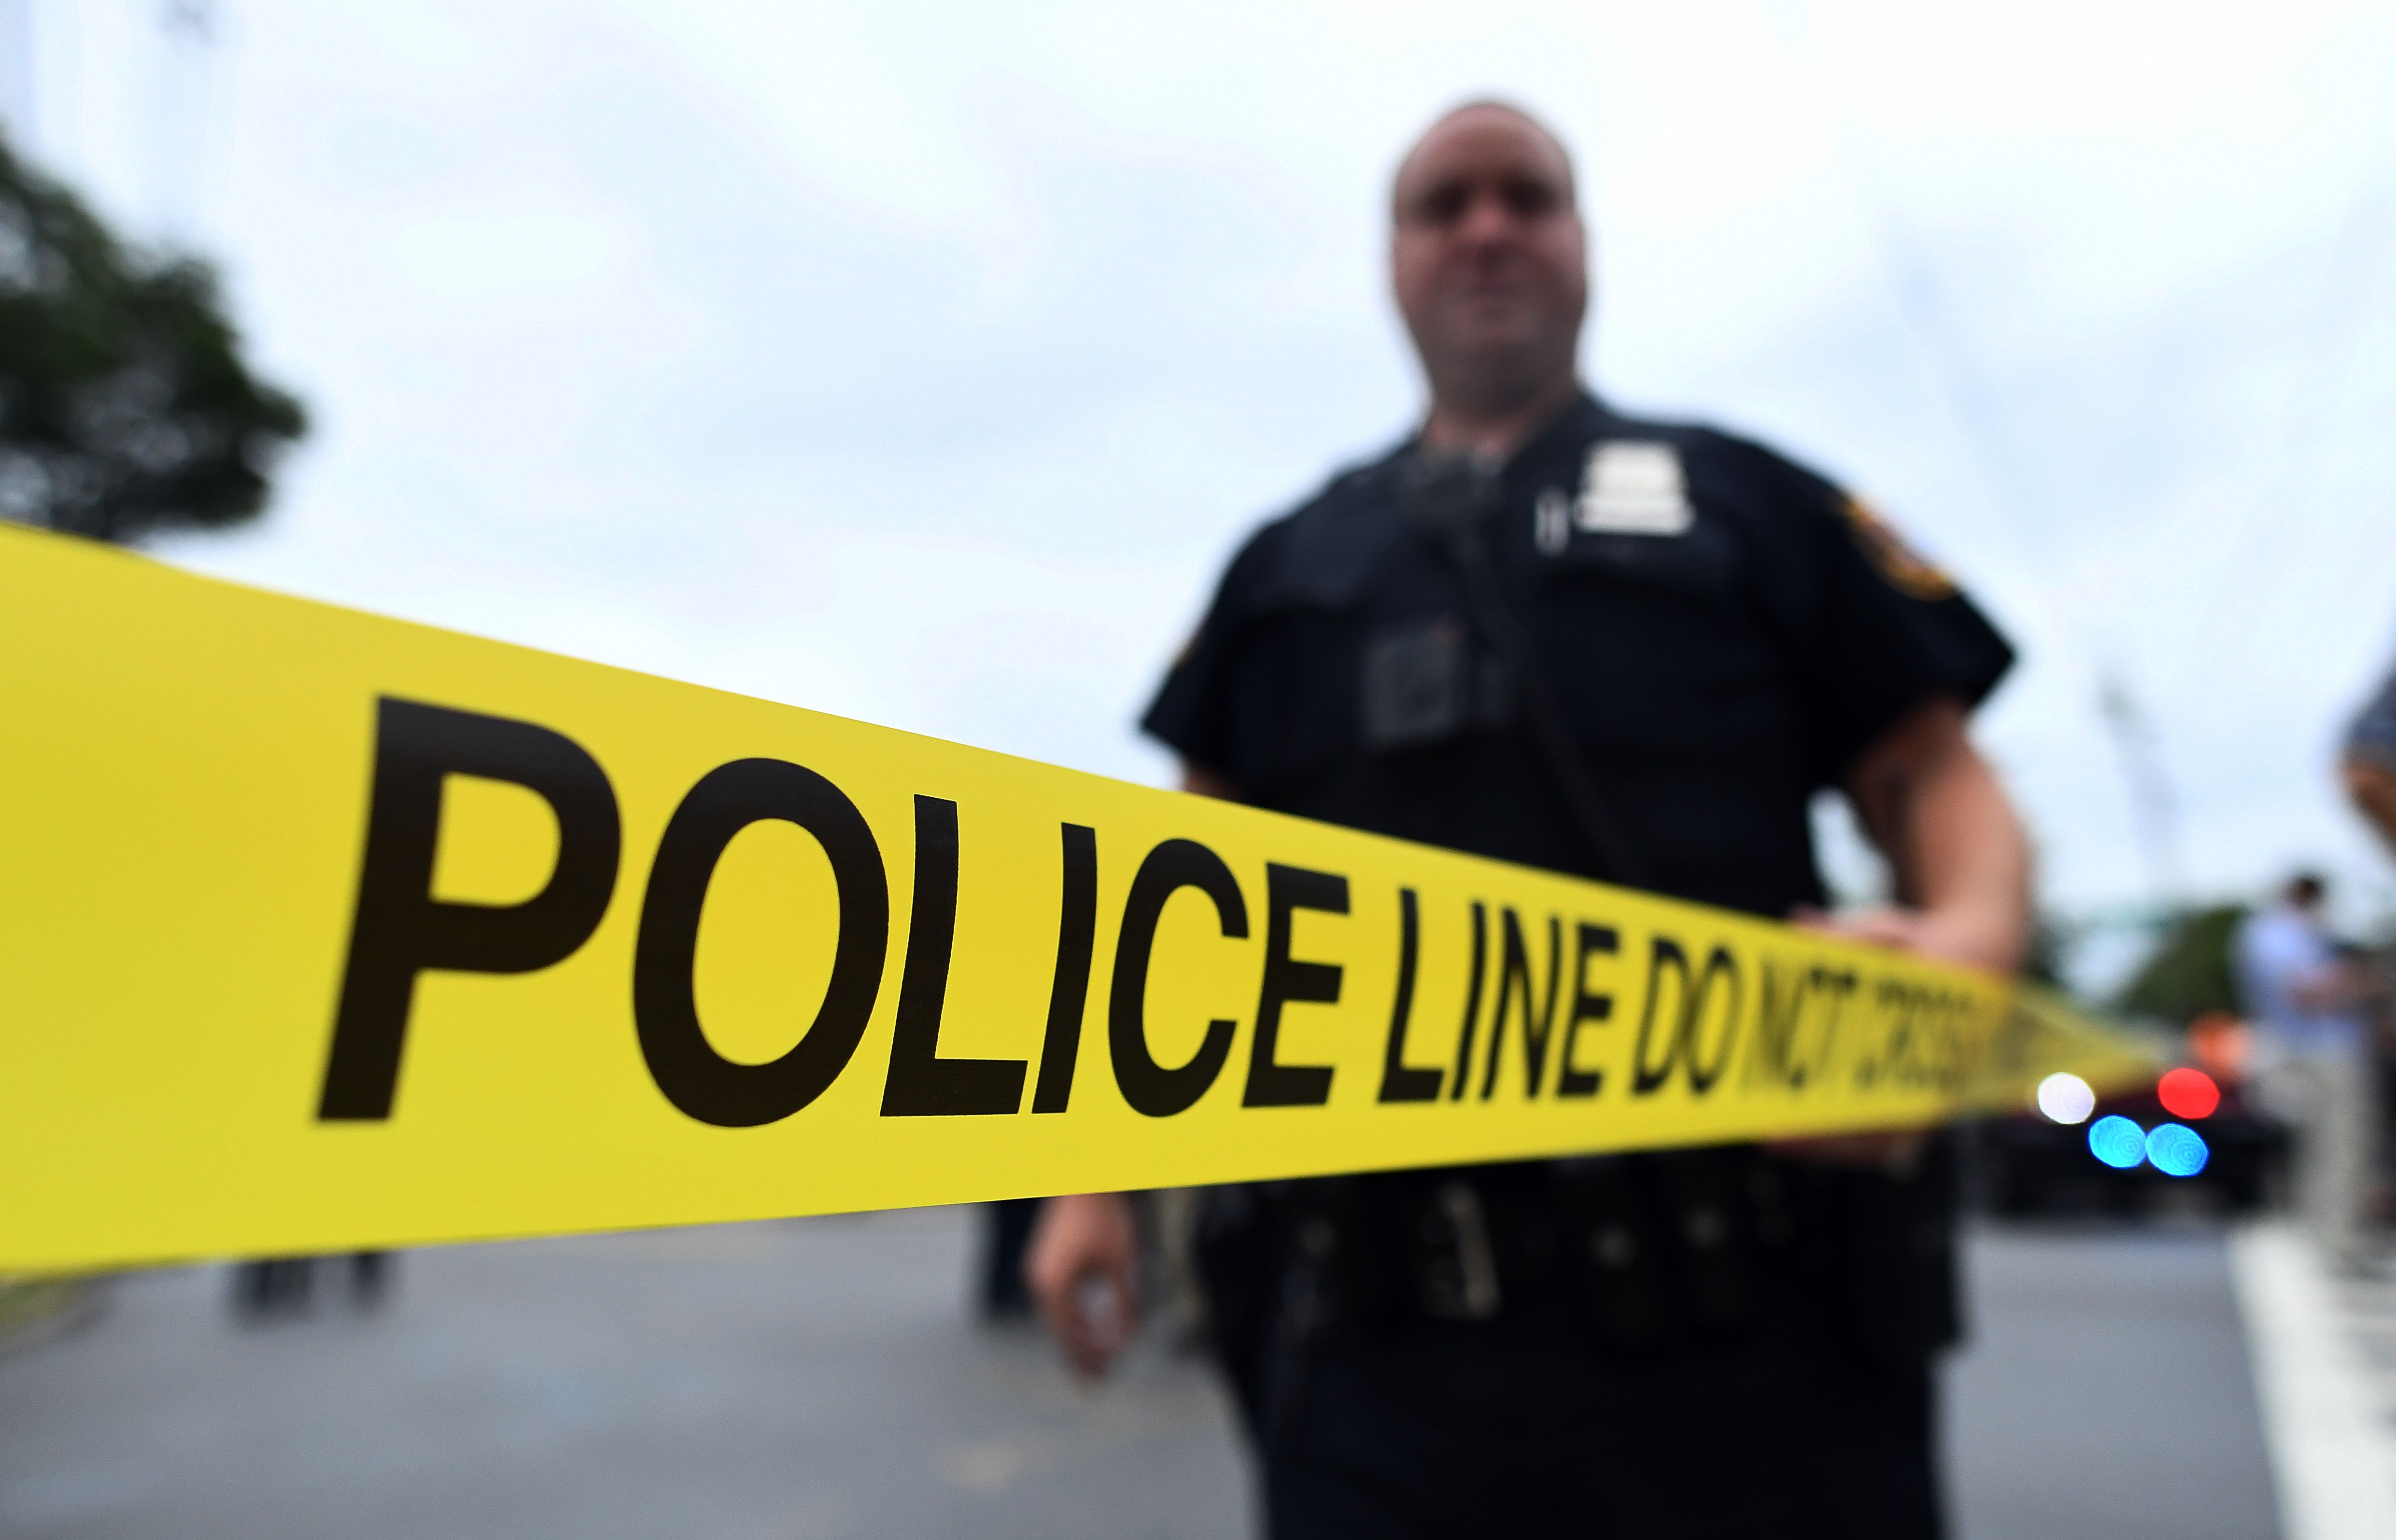 A stock image of police in Linden, NJ